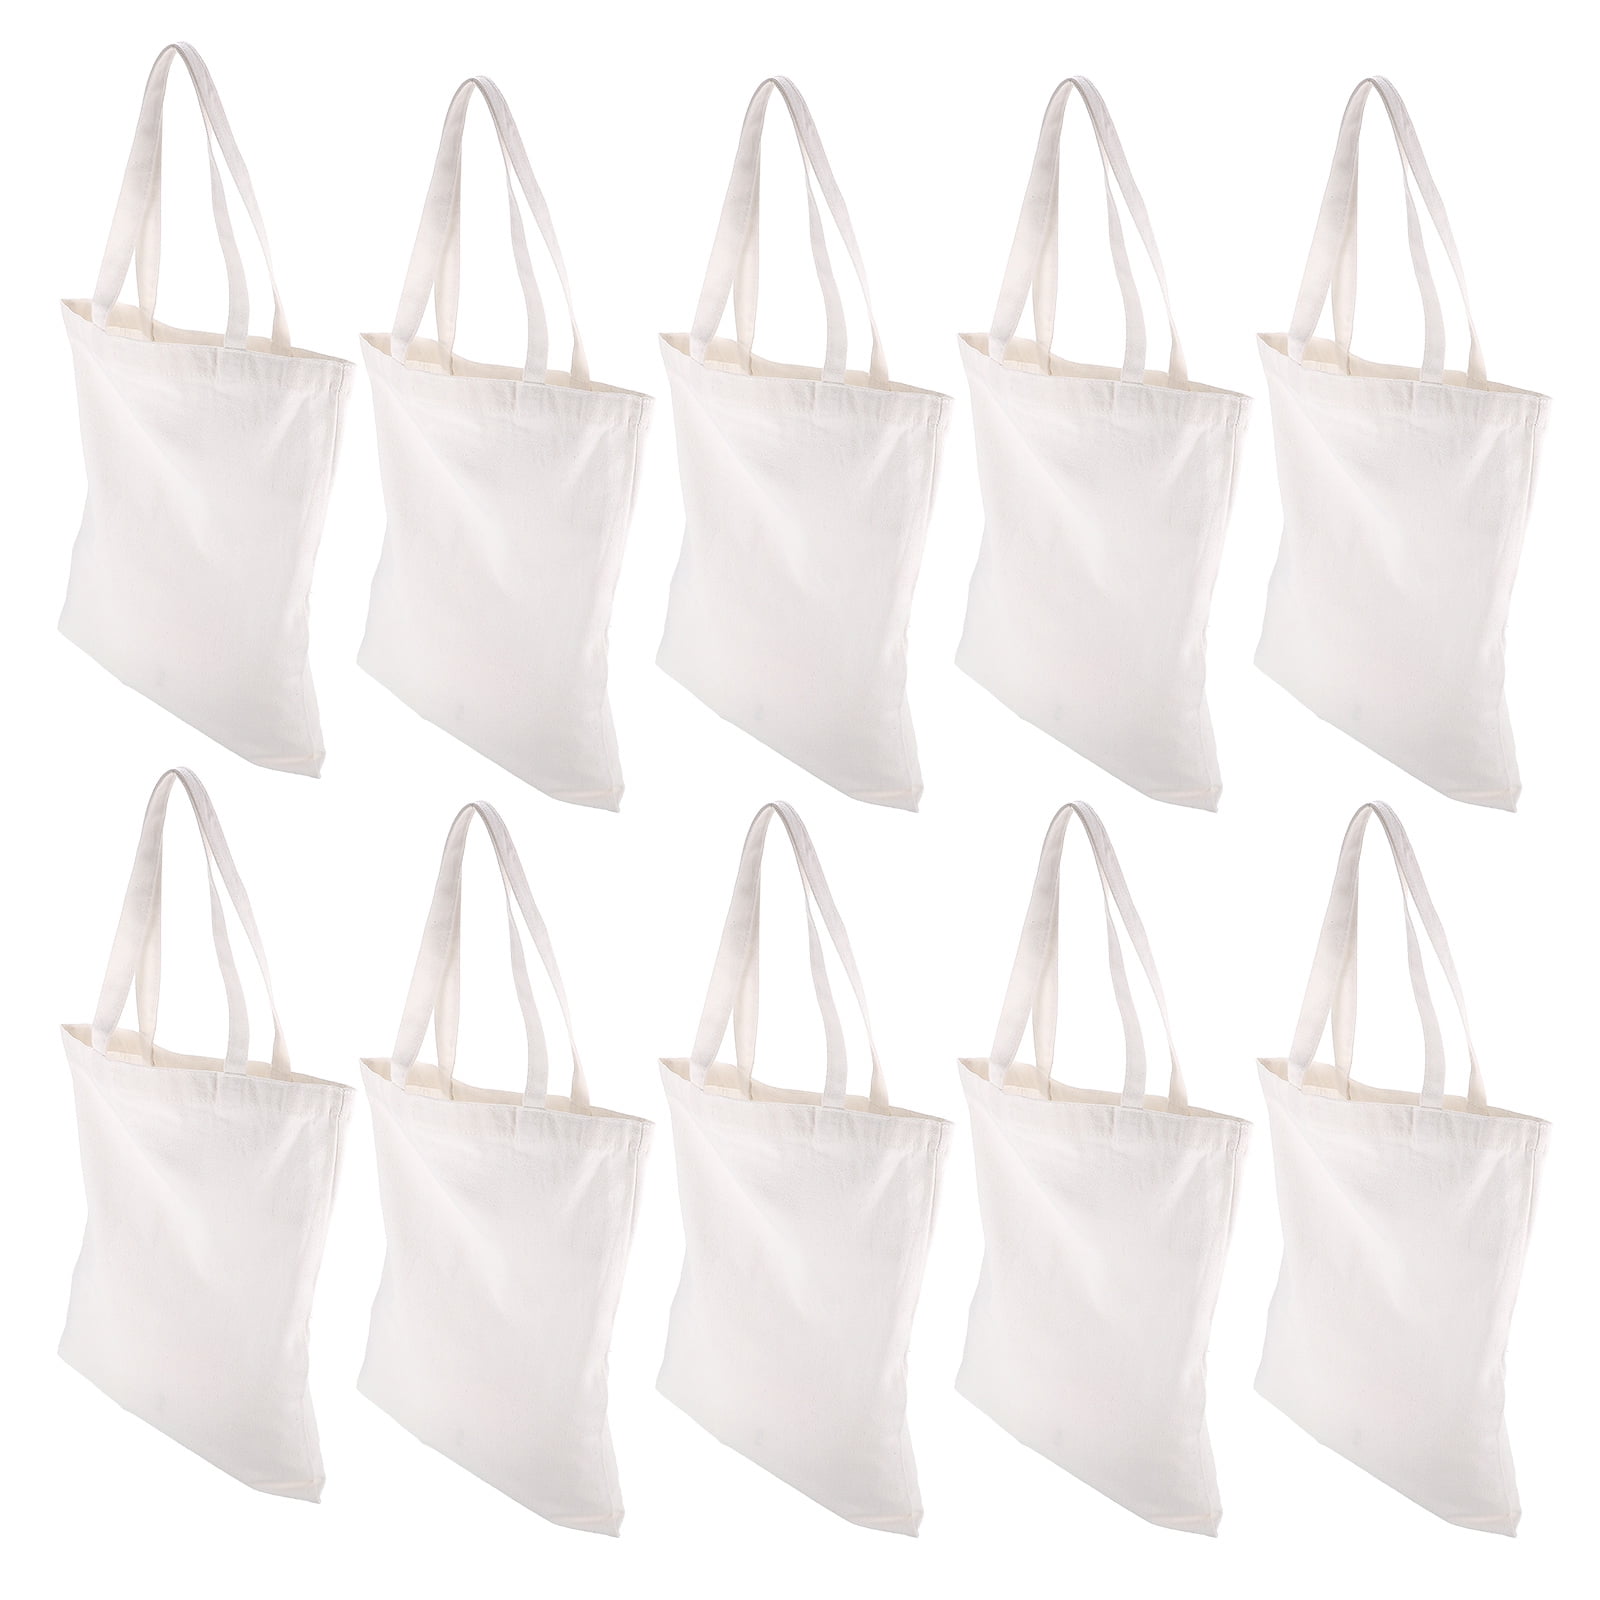 stonechic 24 Pieces Sublimation Tote Bags Blank Canvas Tote Bags Grocery  Bags for Heat Transfer Vinyl DIY Crafting White